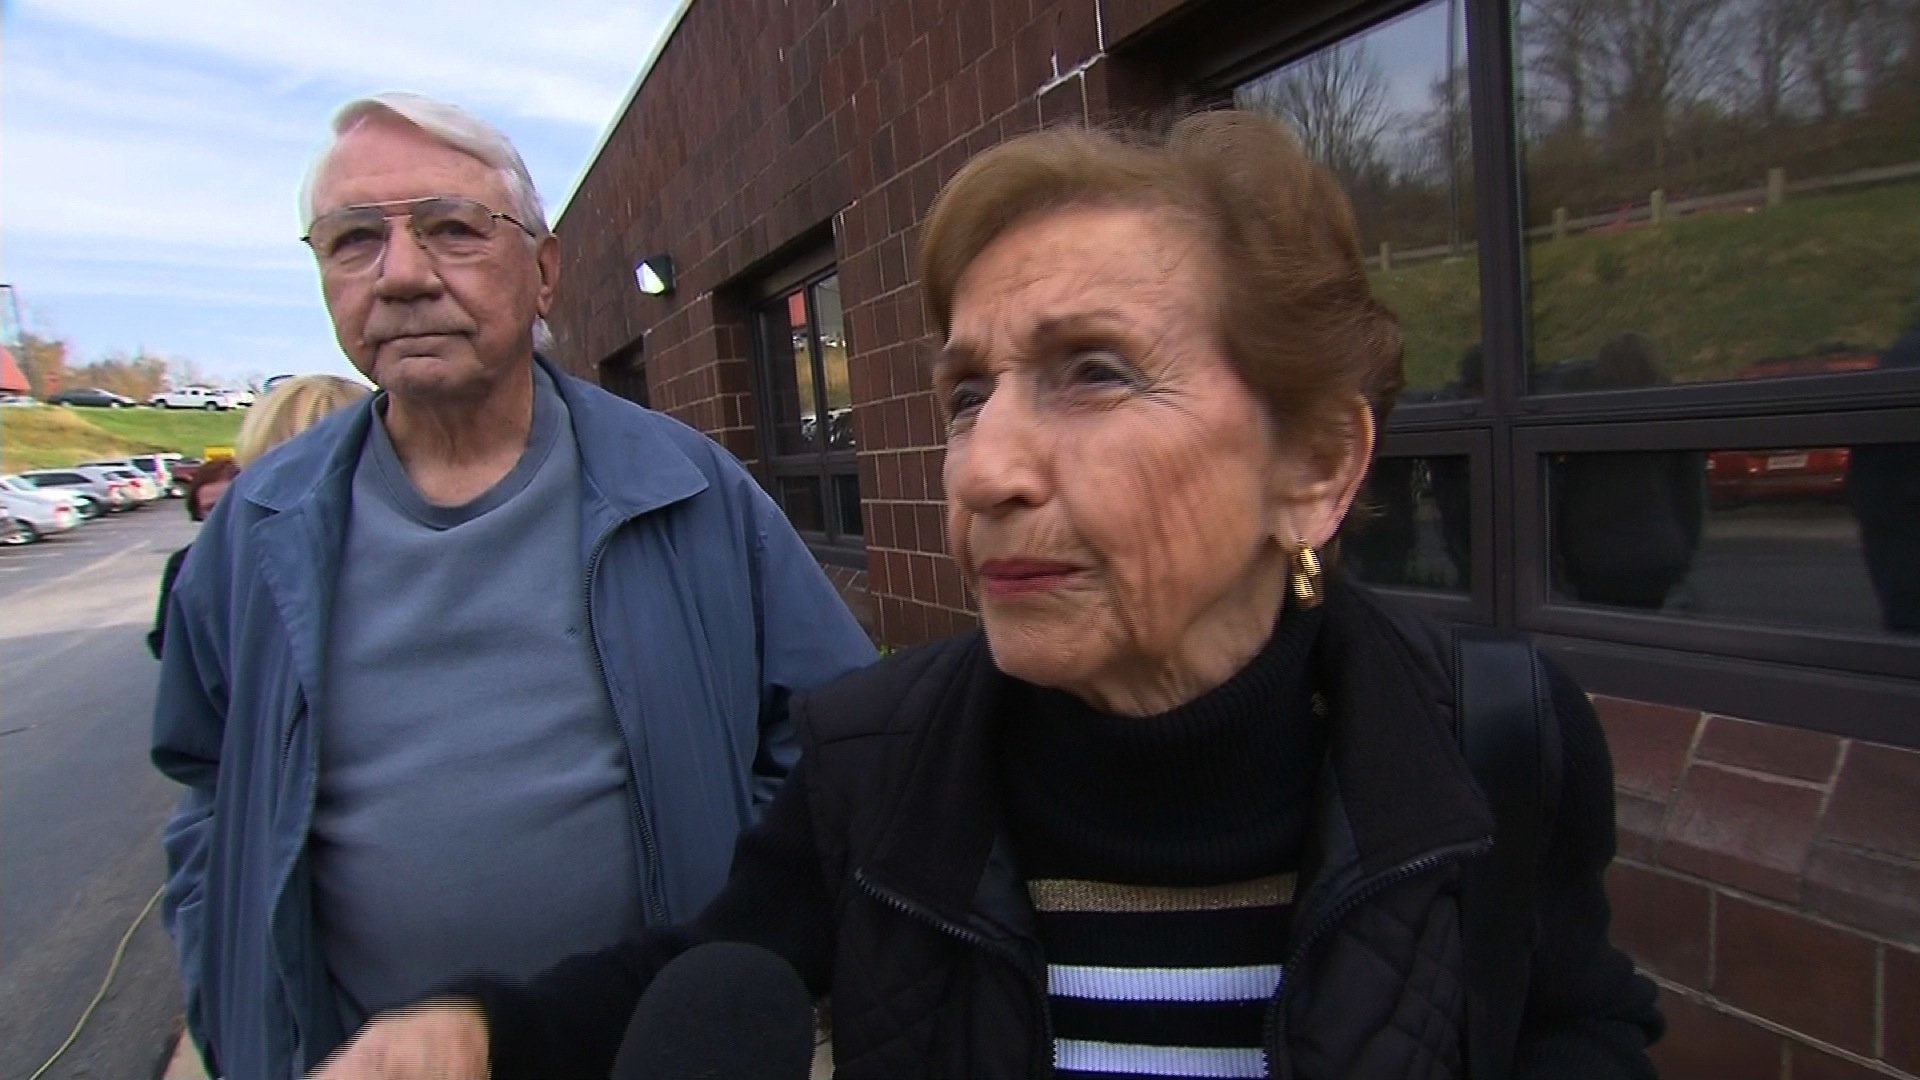 In Washington County, just south of Pittsburgh, Pennsylvania an elderly couple has agreed on a lot of things during their 37-year marriage. The wife, Jackis Krachala is supporting Donald Trump and the husband Bill is voting for Hillary Clinton.